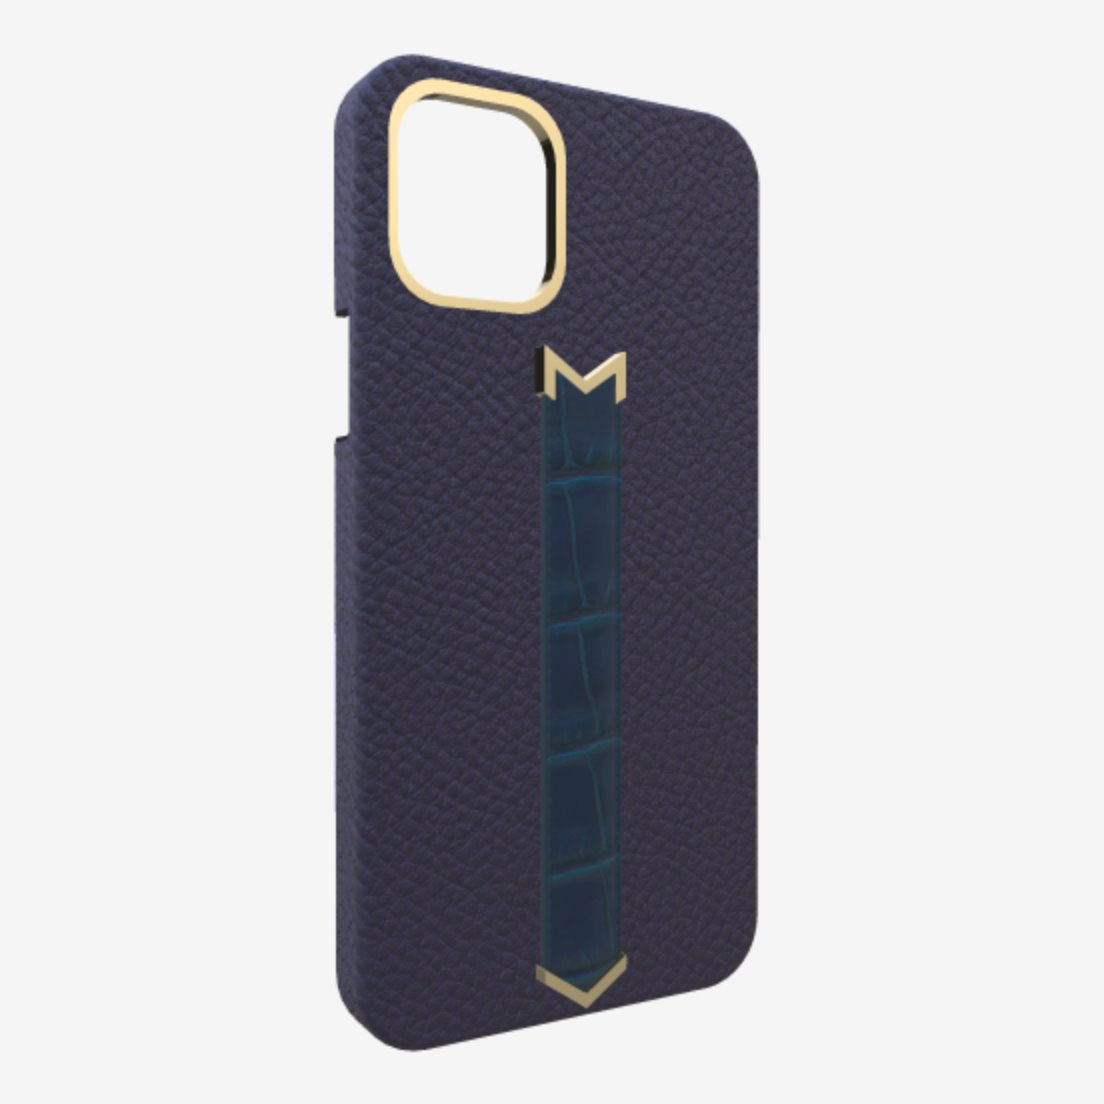 Gold Finger Strap Case for iPhone 13 Pro Max in Genuine Calfskin and Alligator Navy Blue Night Blue 